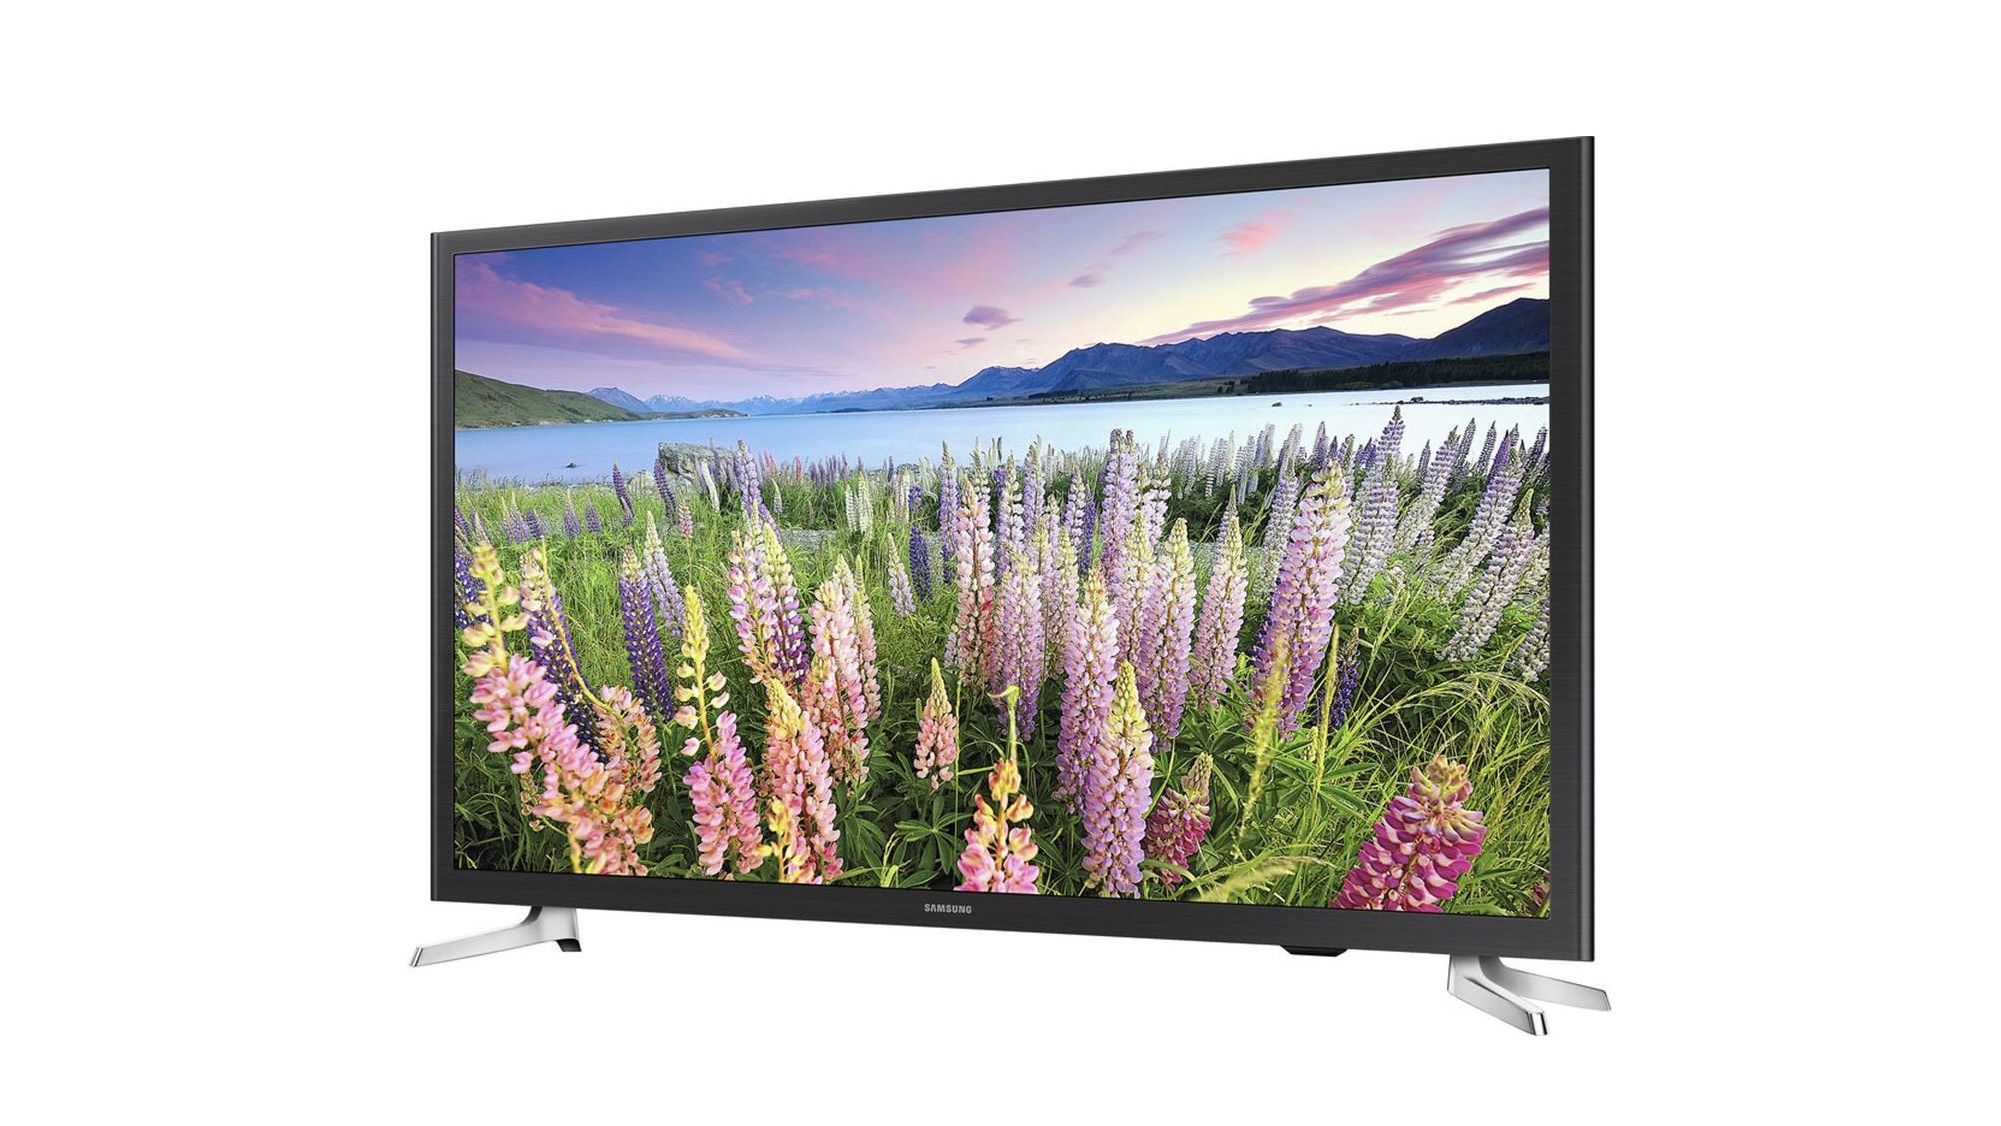 8 Best Small Tvs Under 32 Inches In 2017 – Small Flat Throughout 32 Inch Tv Bed (View 5 of 15)